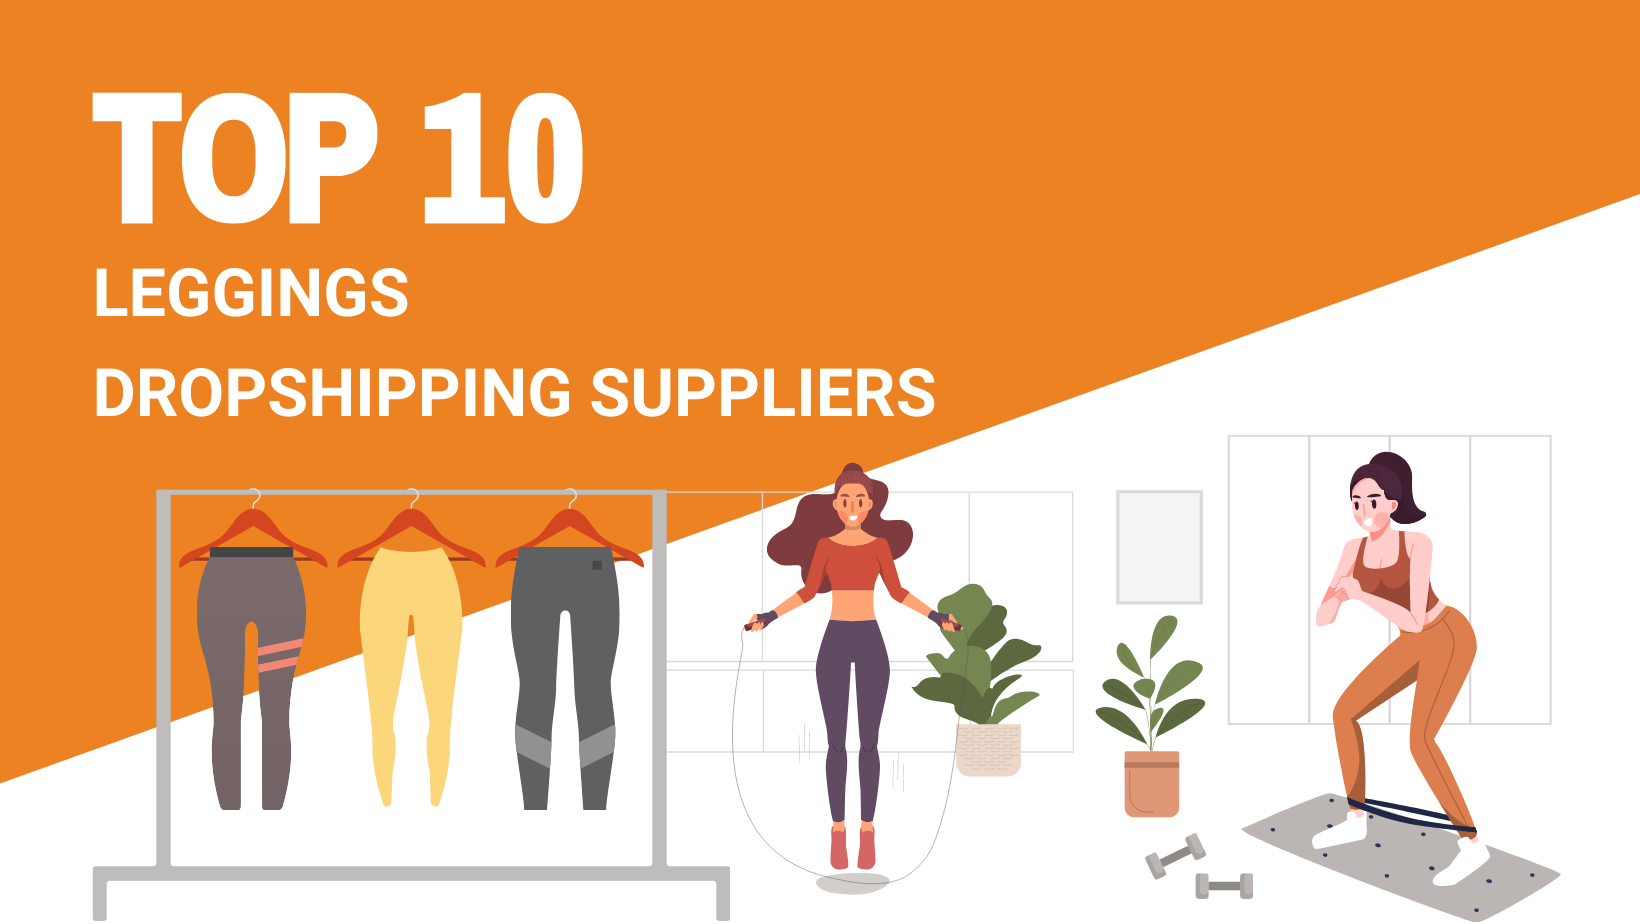 Top 10 Leggings Dropshipping Suppliers - Dropshipping From China